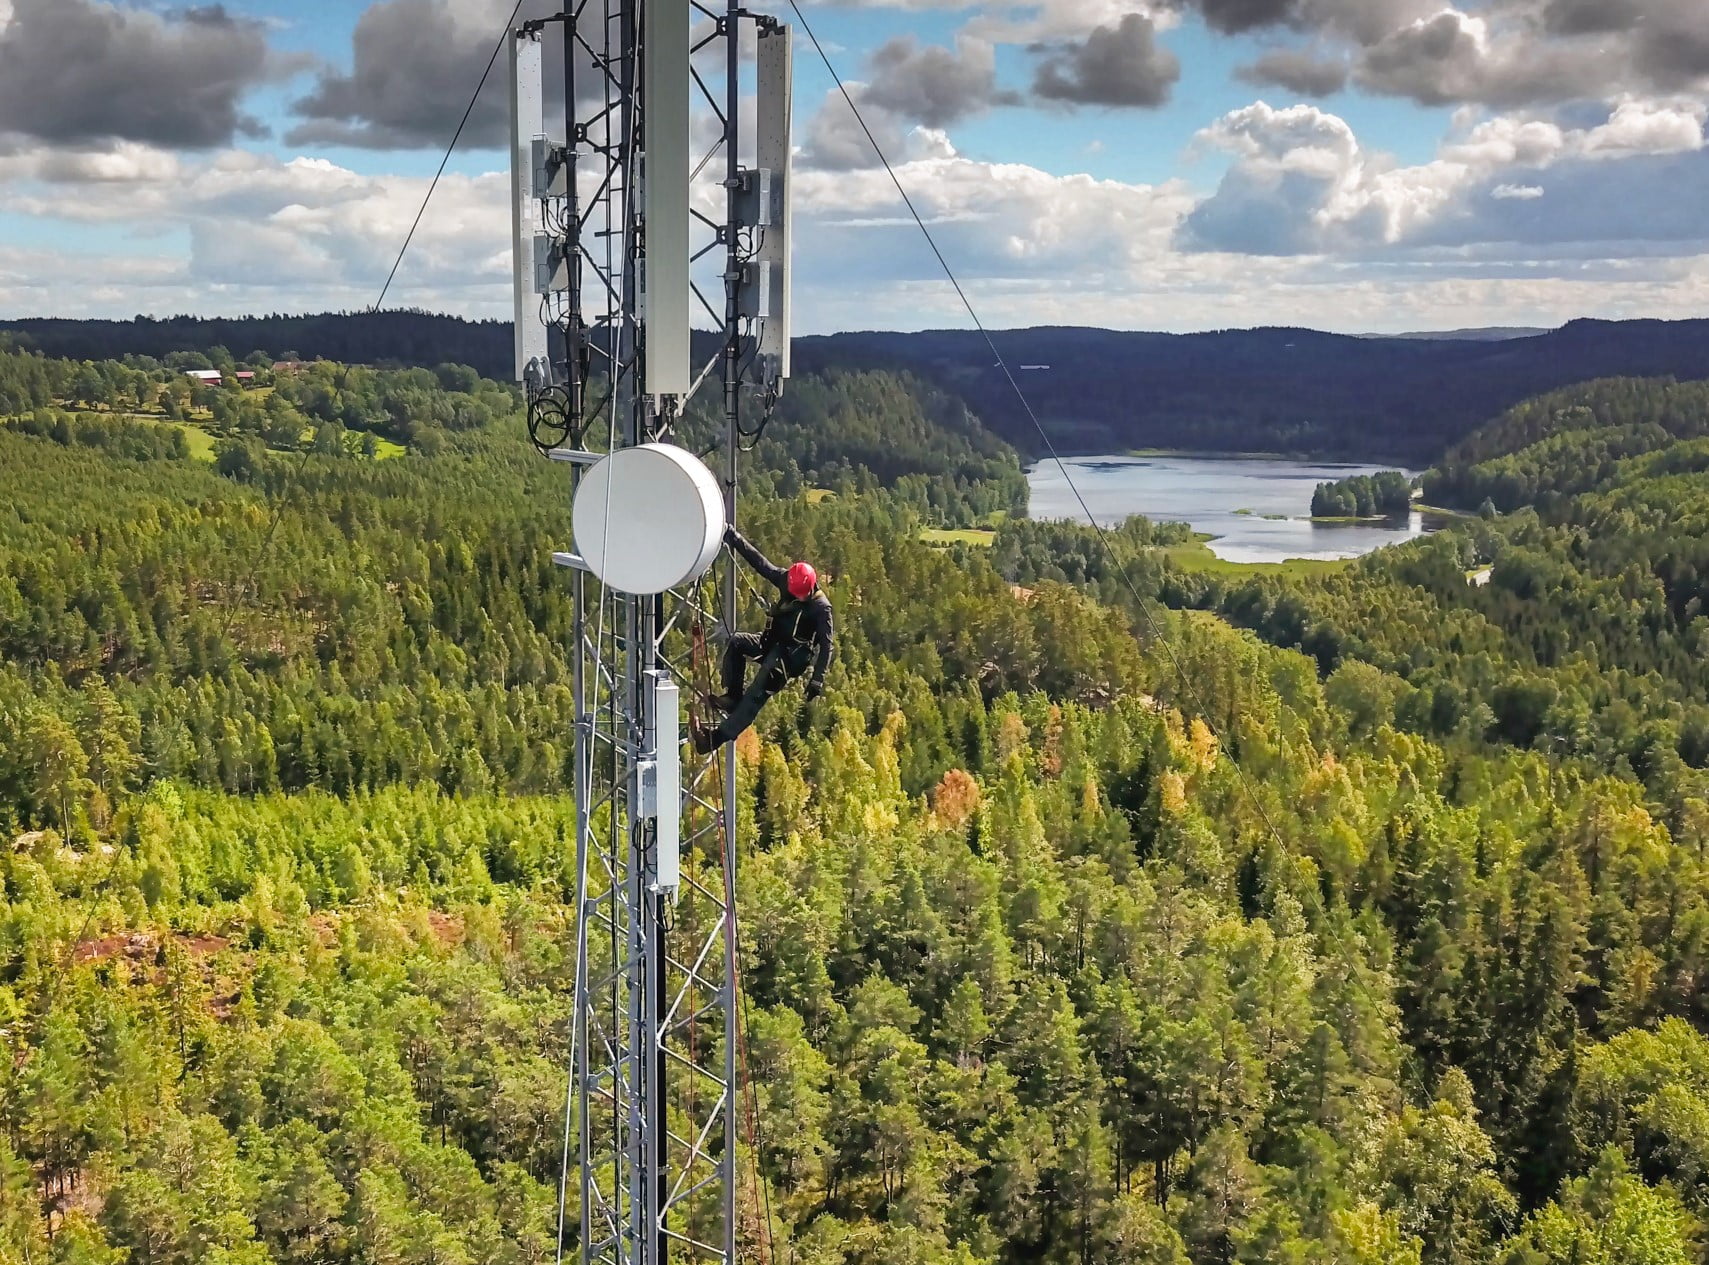 Private LTE network for forest operations: A portable and easy-to-deploy solution